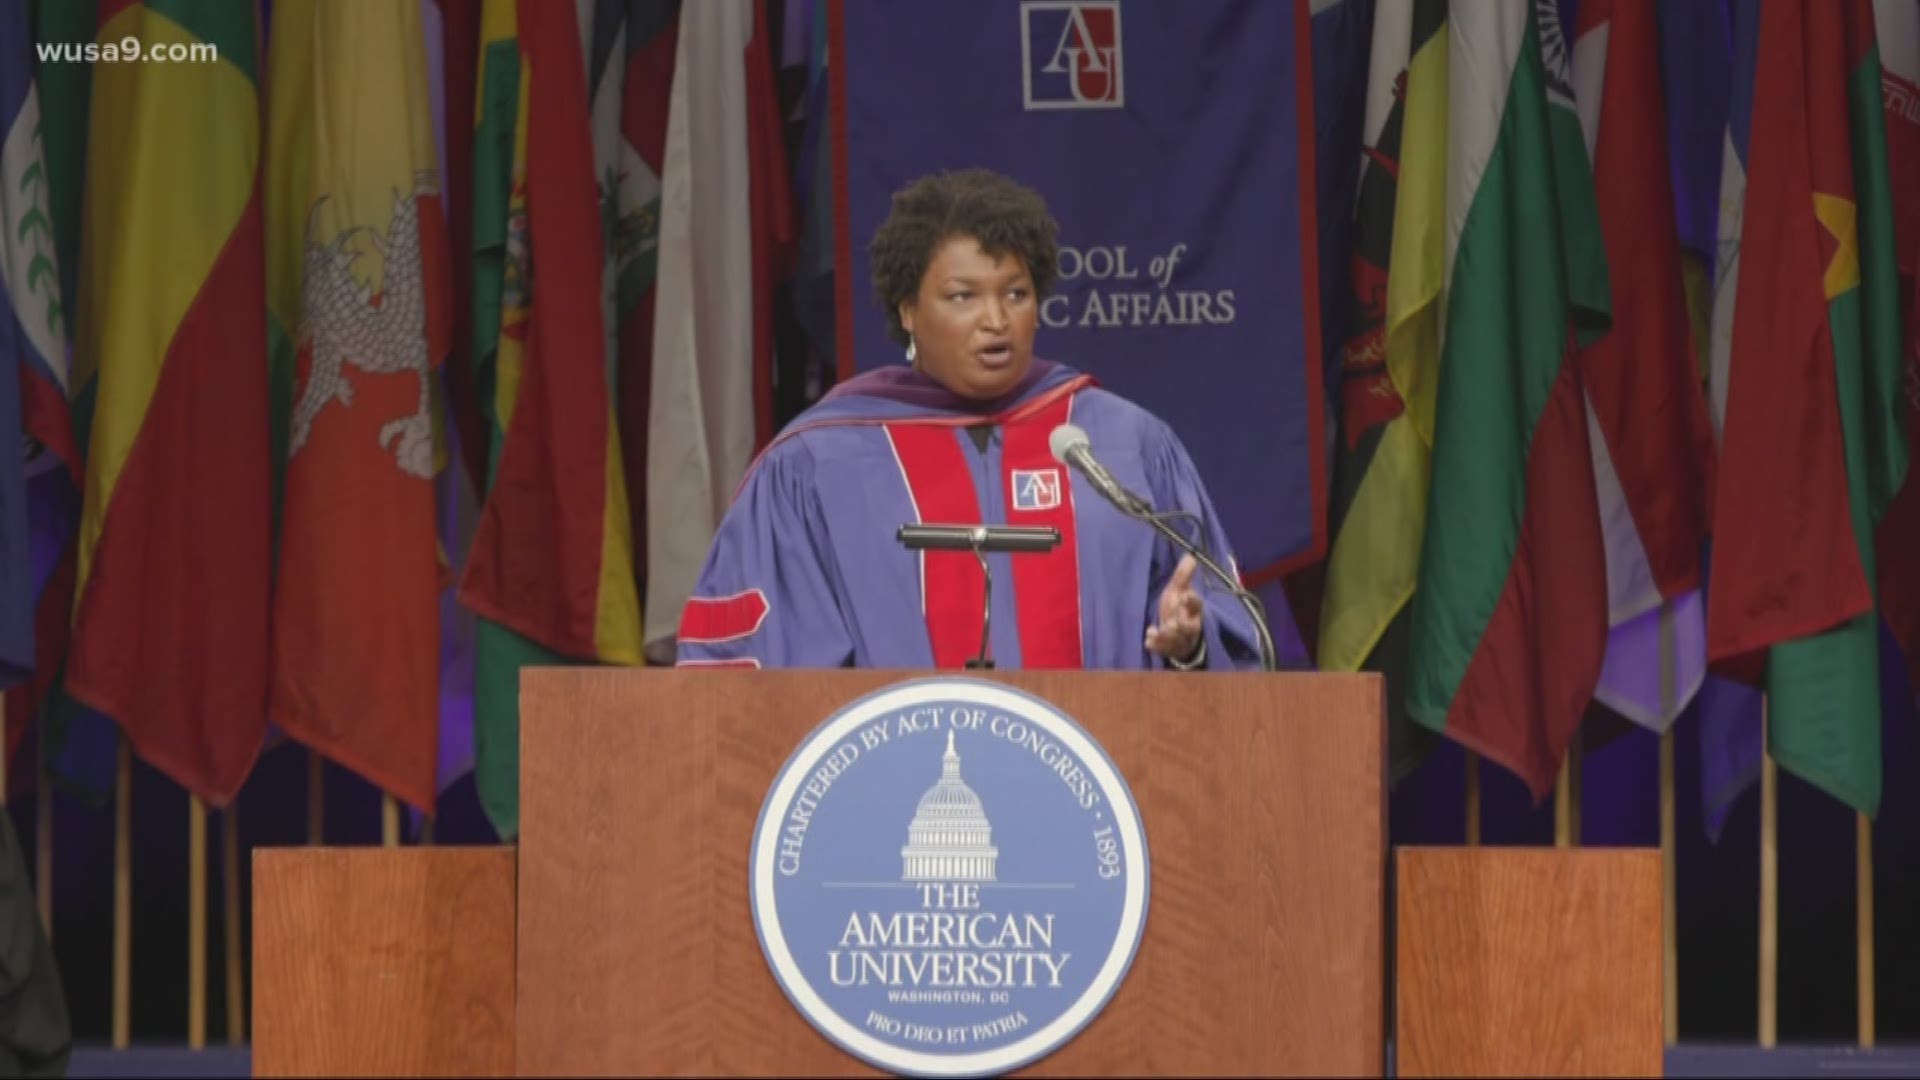 Abrams told the School of Public Affairs Graduating Class despite losing the race for Governor in Georgia she is still committed to service and fighting for voting rights and voting integrity.